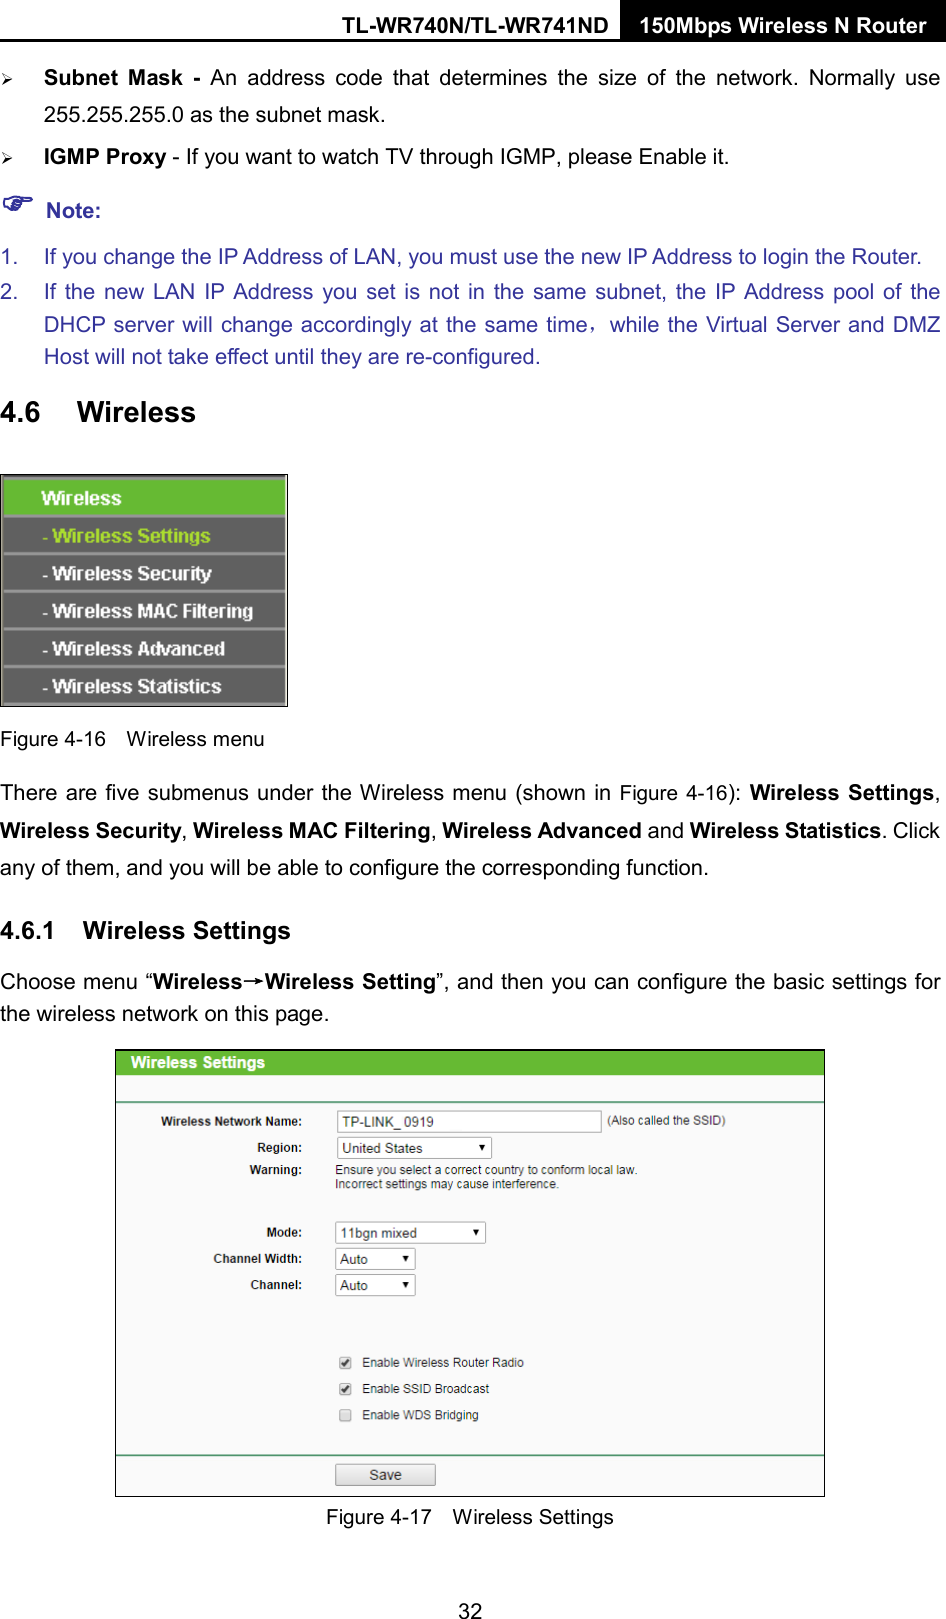 TL-WR740N/TL-WR741ND 150Mbps Wireless N Router   Subnet Mask - An address code that determines the size of the network. Normally use 255.255.255.0 as the subnet mask.    IGMP Proxy - If you want to watch TV through IGMP, please Enable it.  Note: 1. If you change the IP Address of LAN, you must use the new IP Address to login the Router.   2. If the new LAN IP Address you set is not in the same subnet, the IP Address pool of the DHCP server will change accordingly at the same time，while the Virtual Server and DMZ Host will not take effect until they are re-configured. 4.6 Wireless  Figure 4-16  Wireless menu There are five submenus under the Wireless menu (shown in Figure 4-16): Wireless Settings, Wireless Security, Wireless MAC Filtering, Wireless Advanced and Wireless Statistics. Click any of them, and you will be able to configure the corresponding function.   4.6.1 Wireless Settings Choose menu “Wireless→Wireless Setting”, and then you can configure the basic settings for the wireless network on this page.  Figure 4-17  Wireless Settings 32 